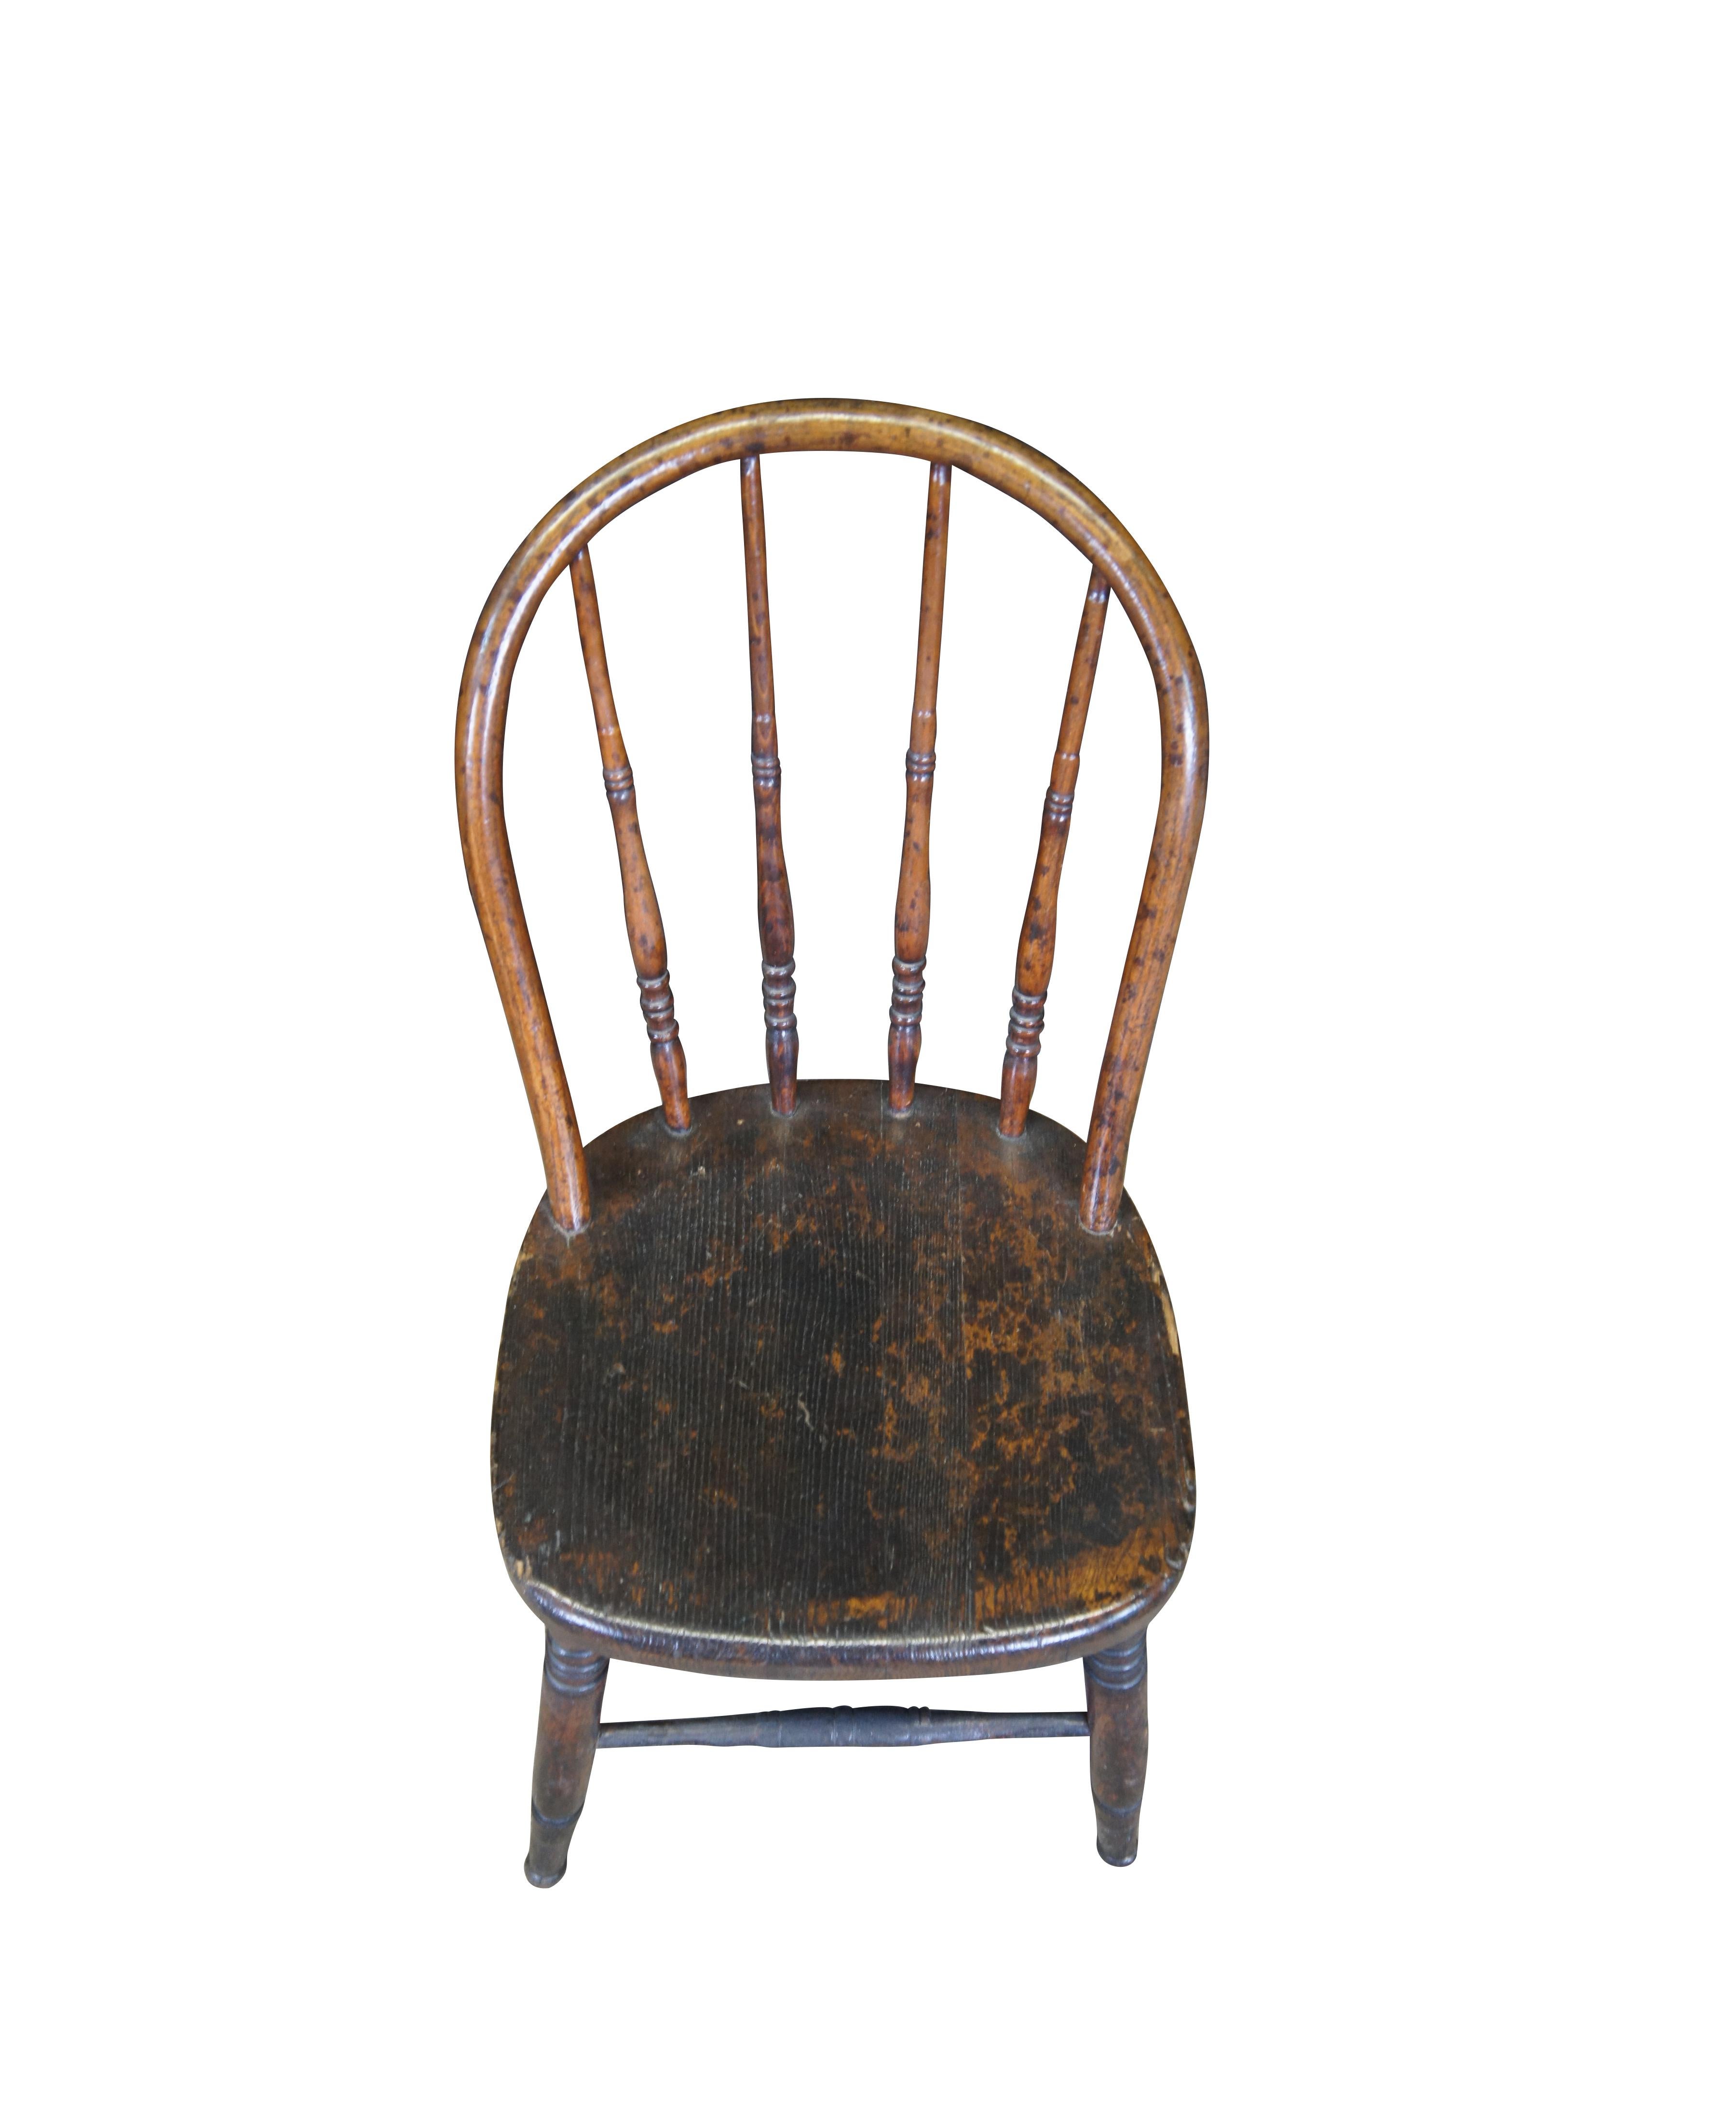 american antique chairs